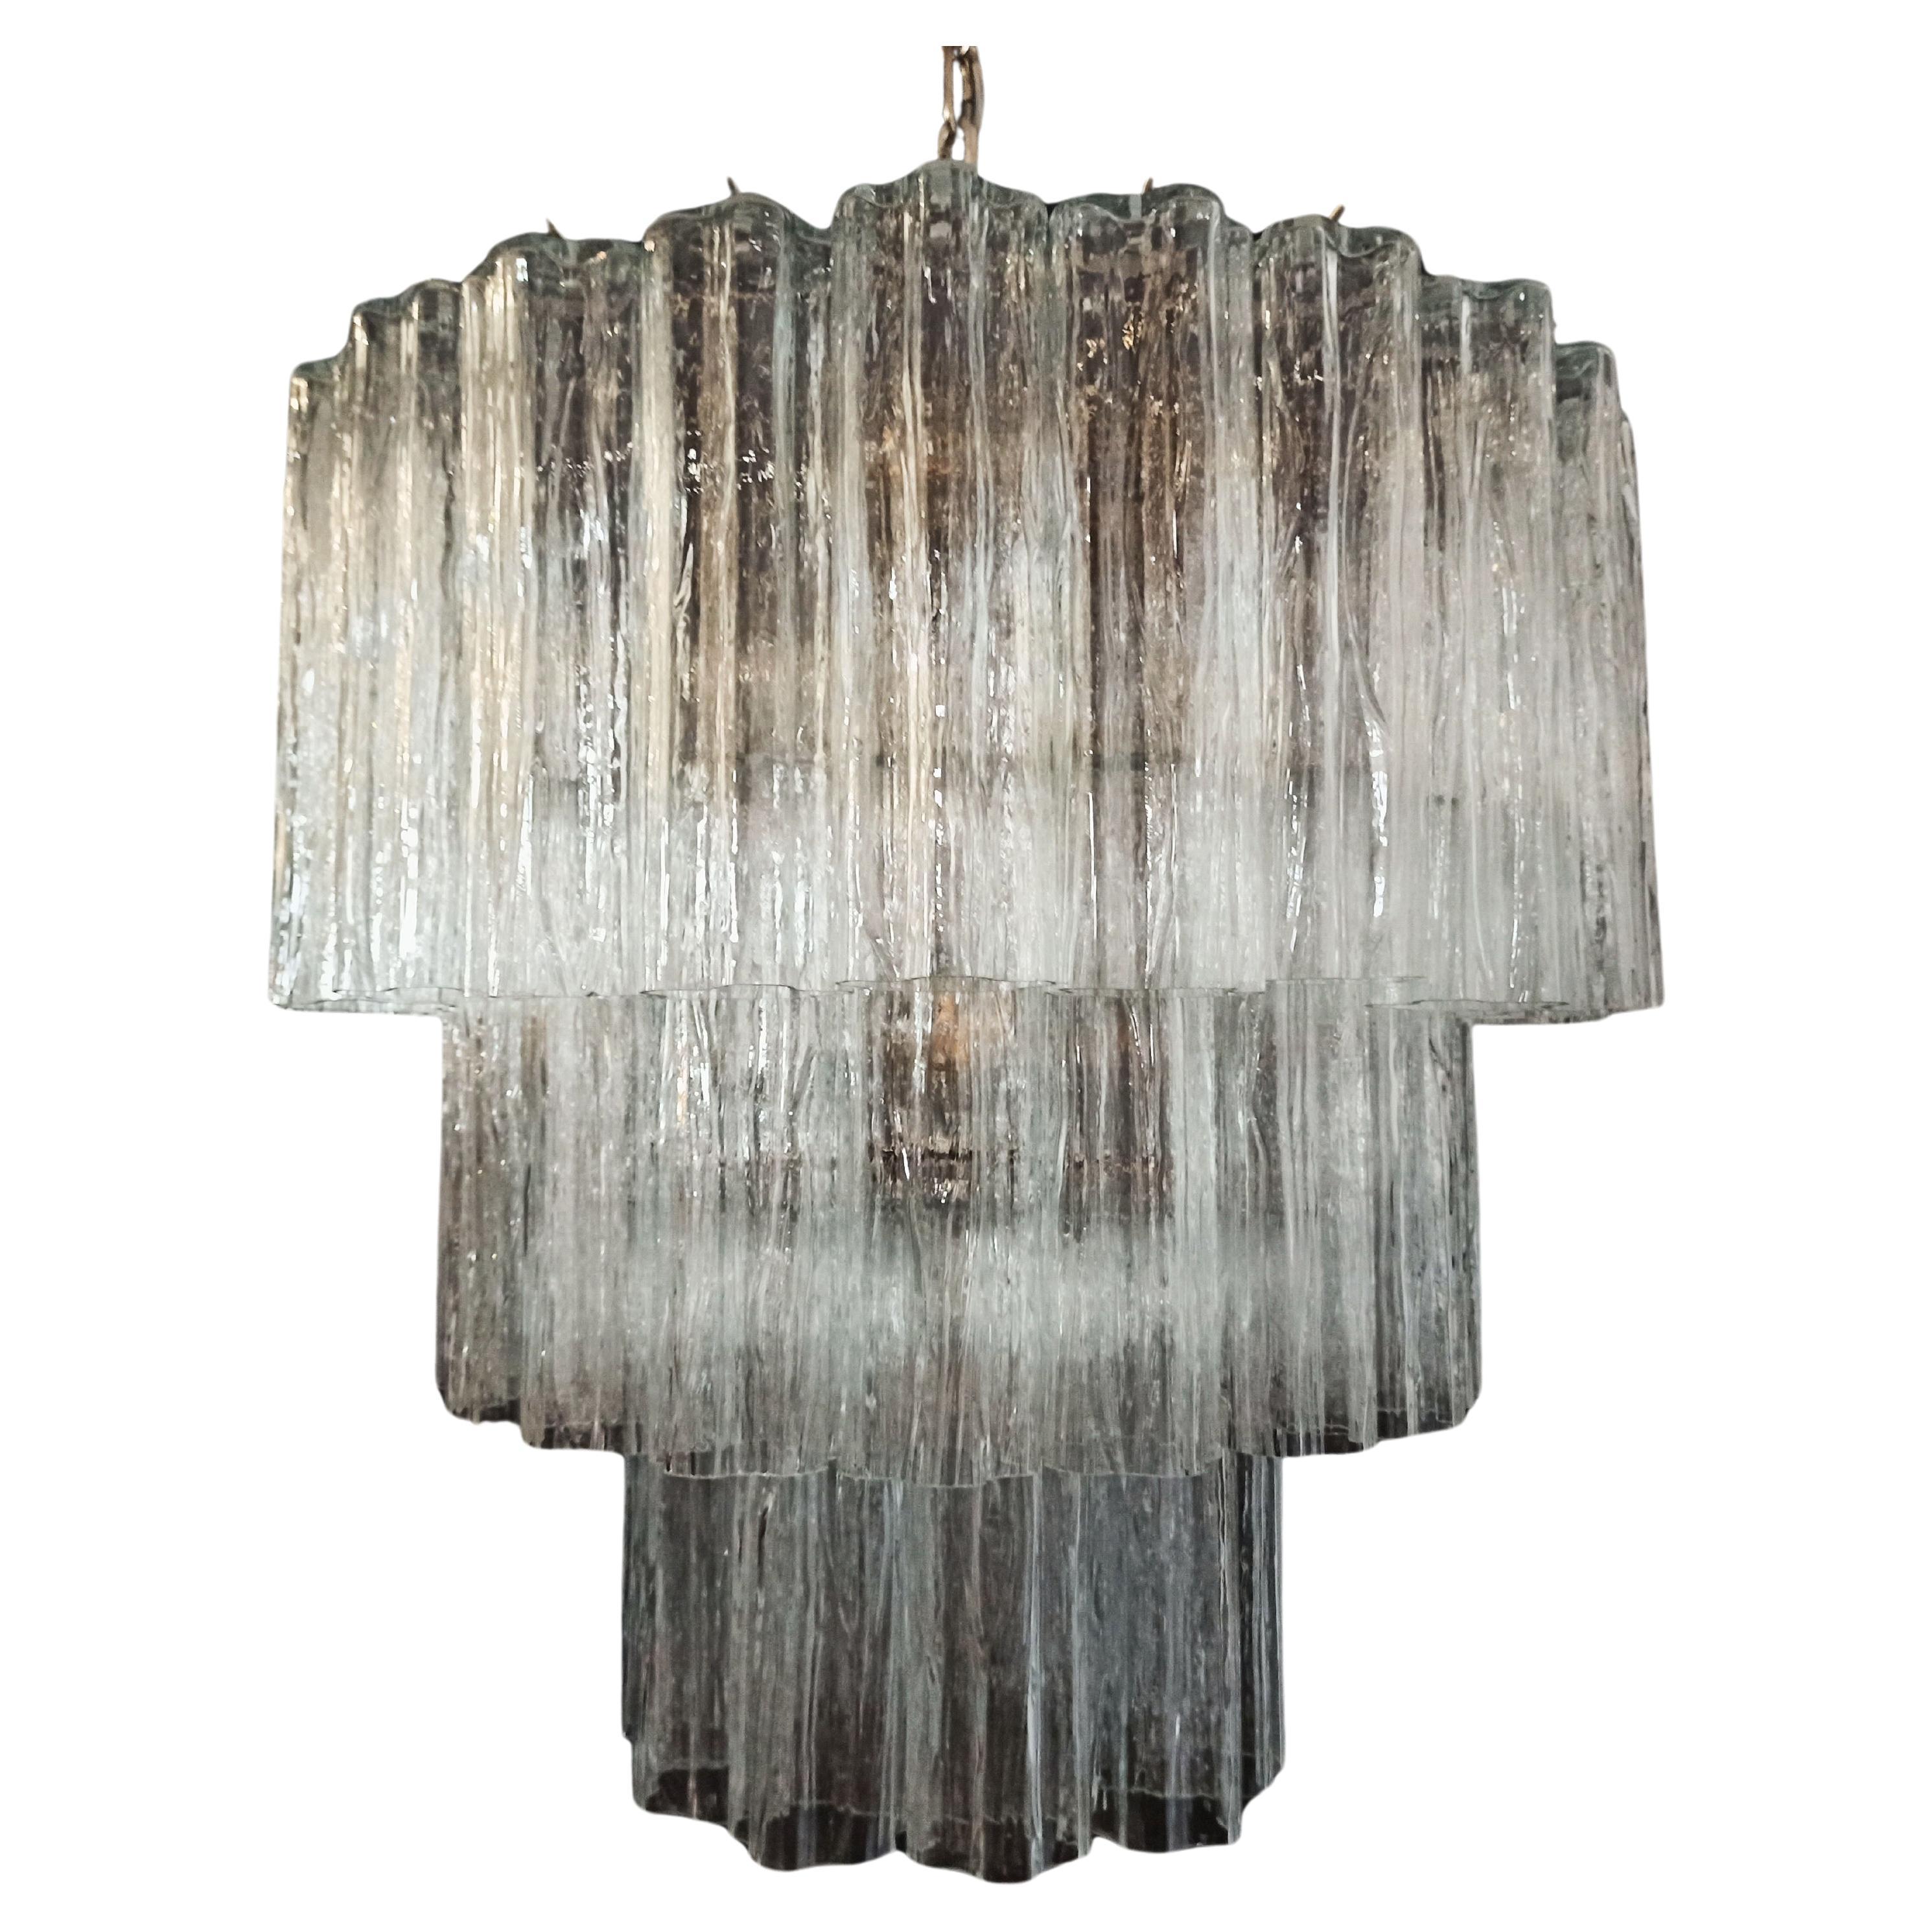 
Italian vintage chandelier in Murano glass and nickel-plated metal structure. The armor polished nickel supports 52 large clear glass tubes in a star shape.
Period: late XX century
Dimensions: 54,20 inches (140 cm) height with chain; 29 inches (75